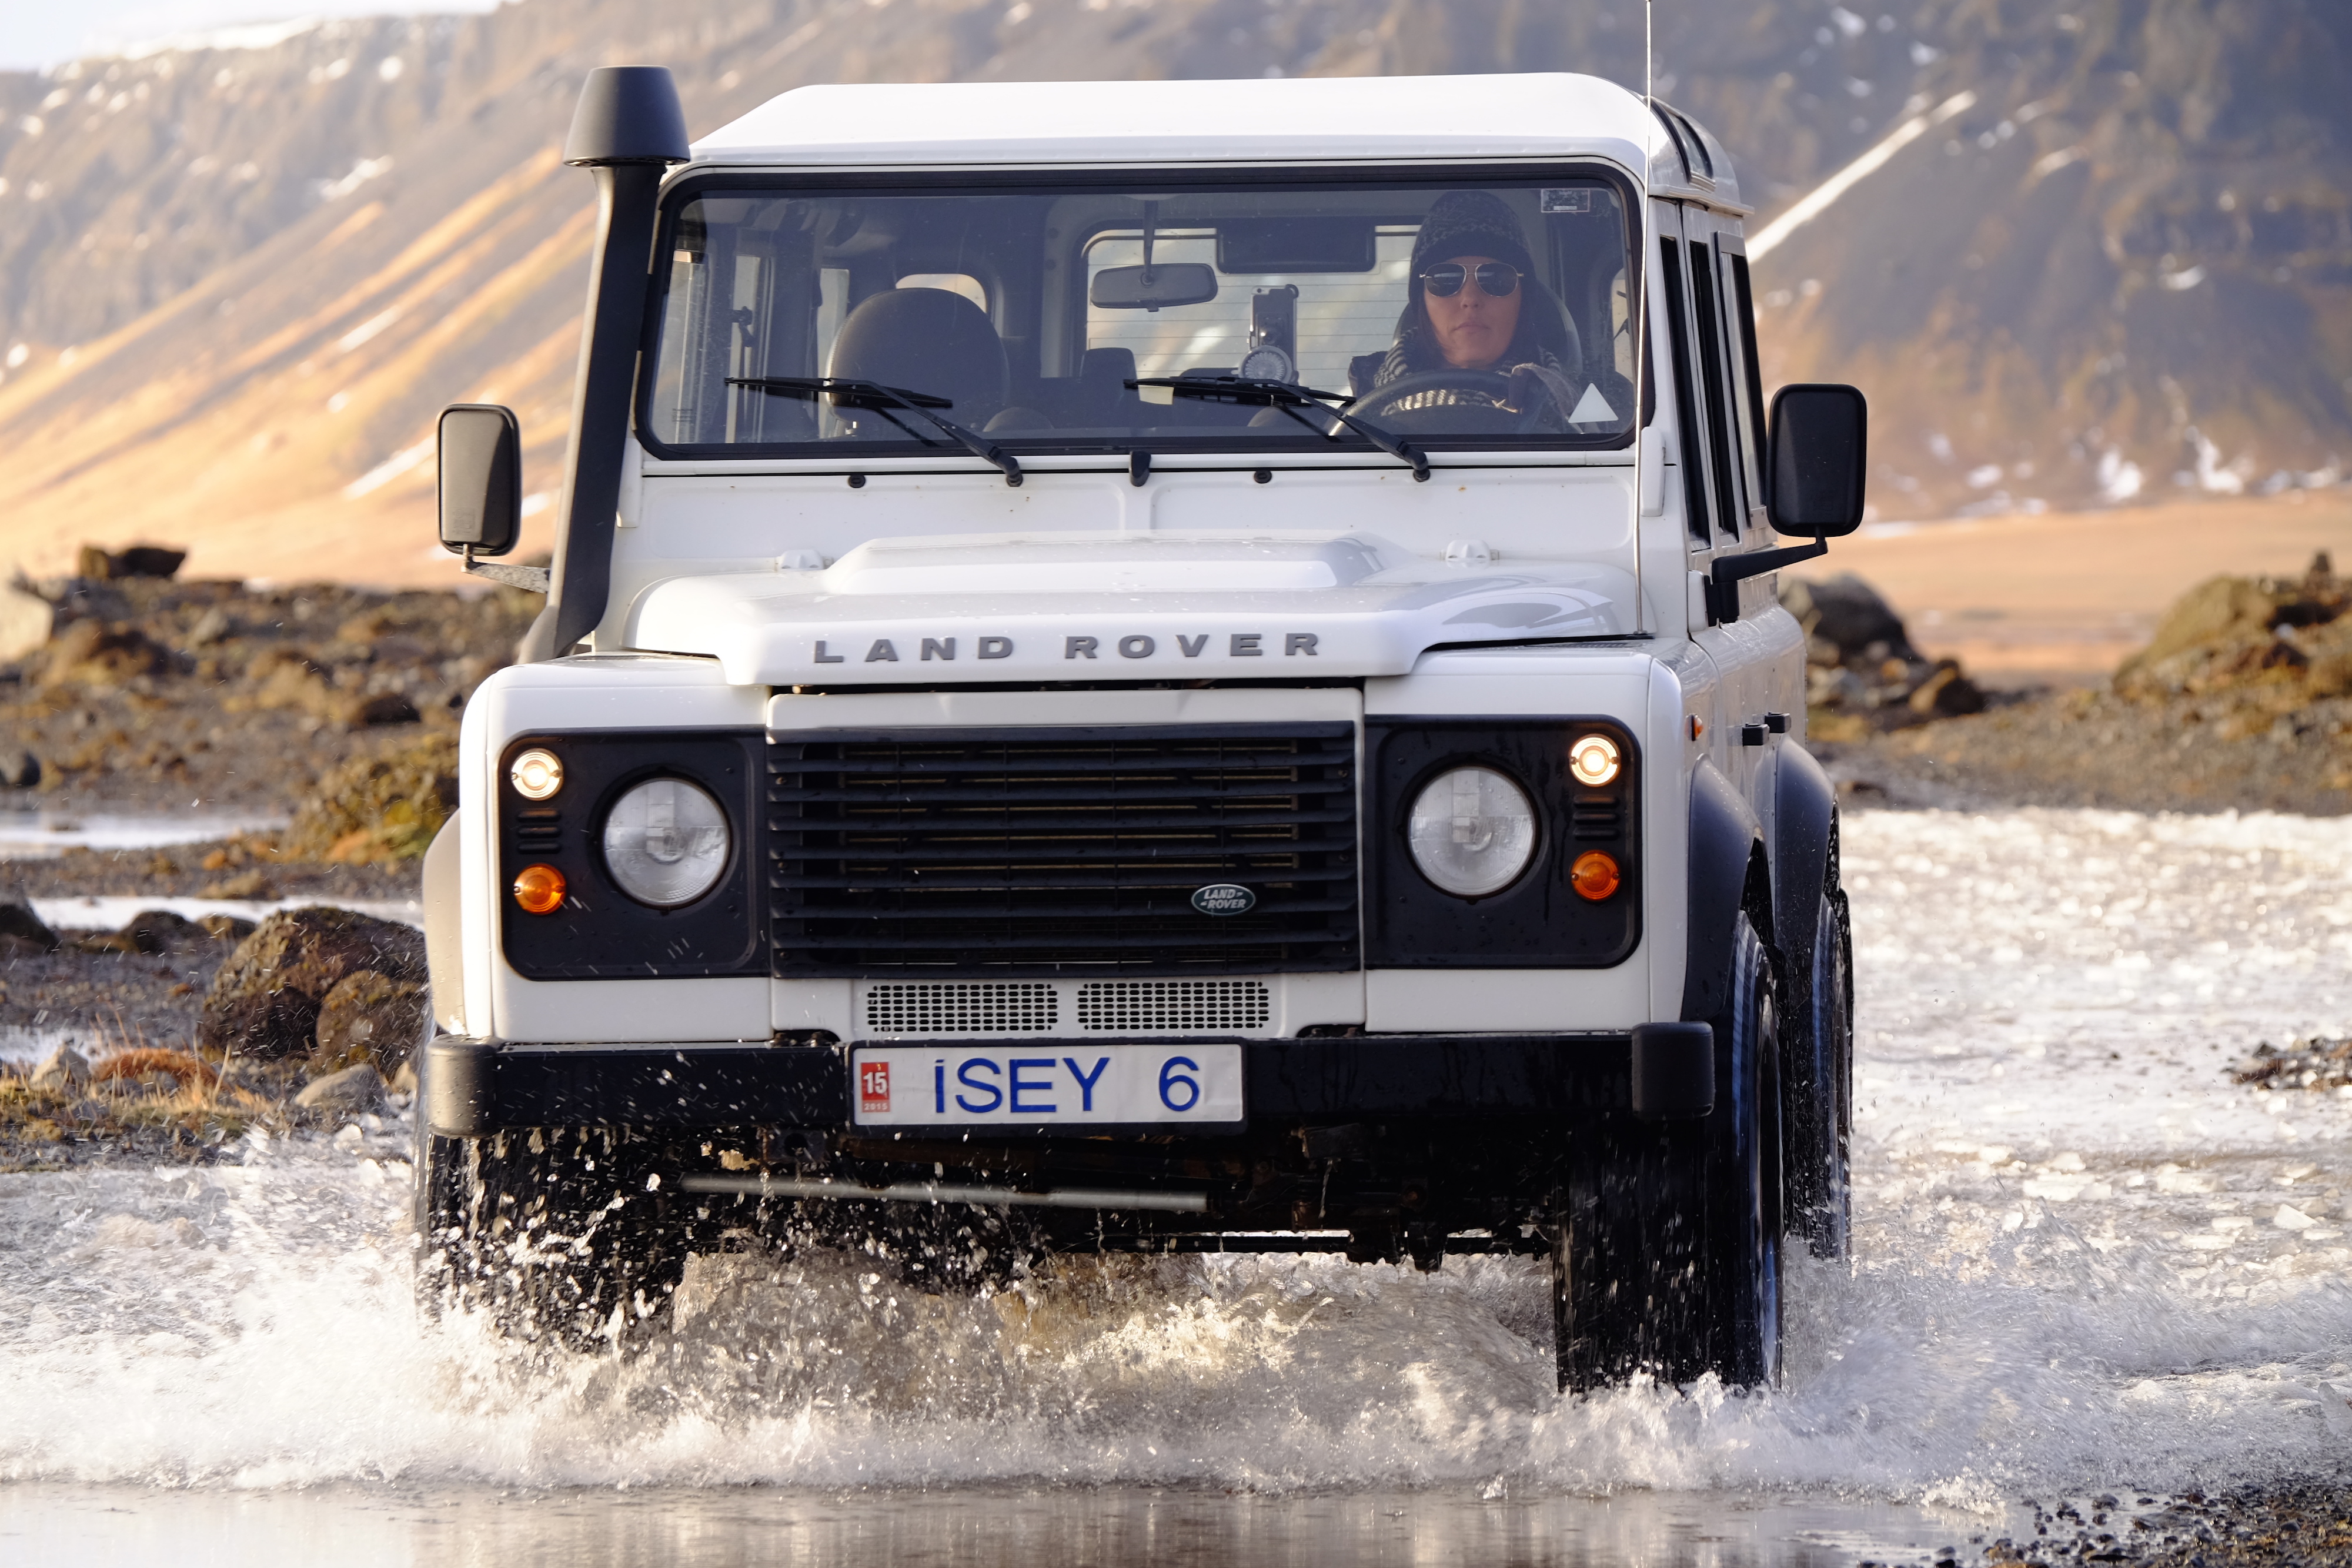 The New Land Rover Defender Manufactured in Austria? - Expedition Portal